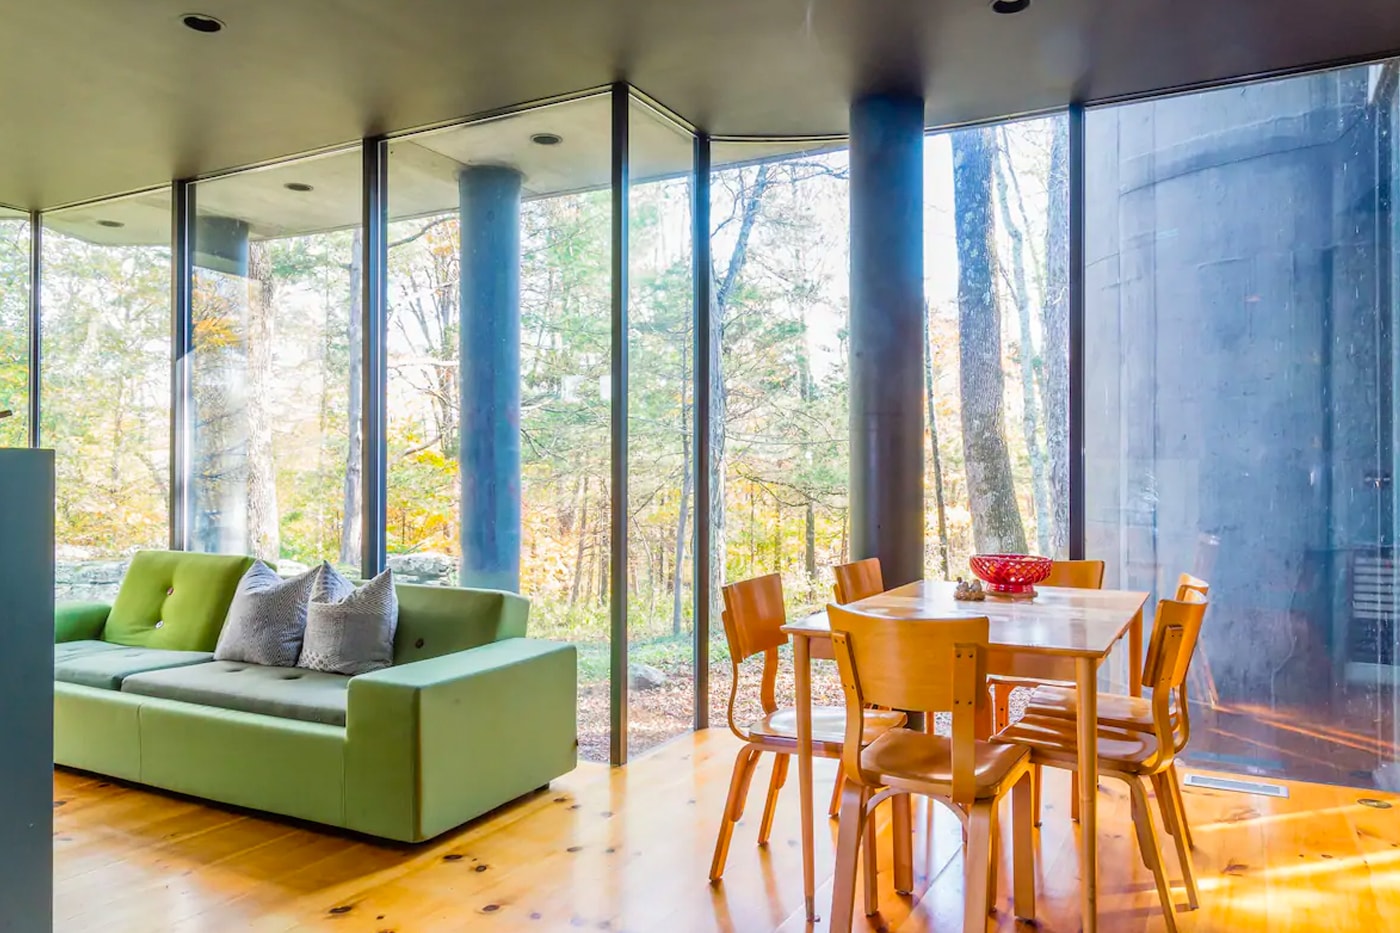 Airbnb Home Rental Woodstock New York The Rubber House Secluded Artist Colony Retreat Post-Modern Interior Design